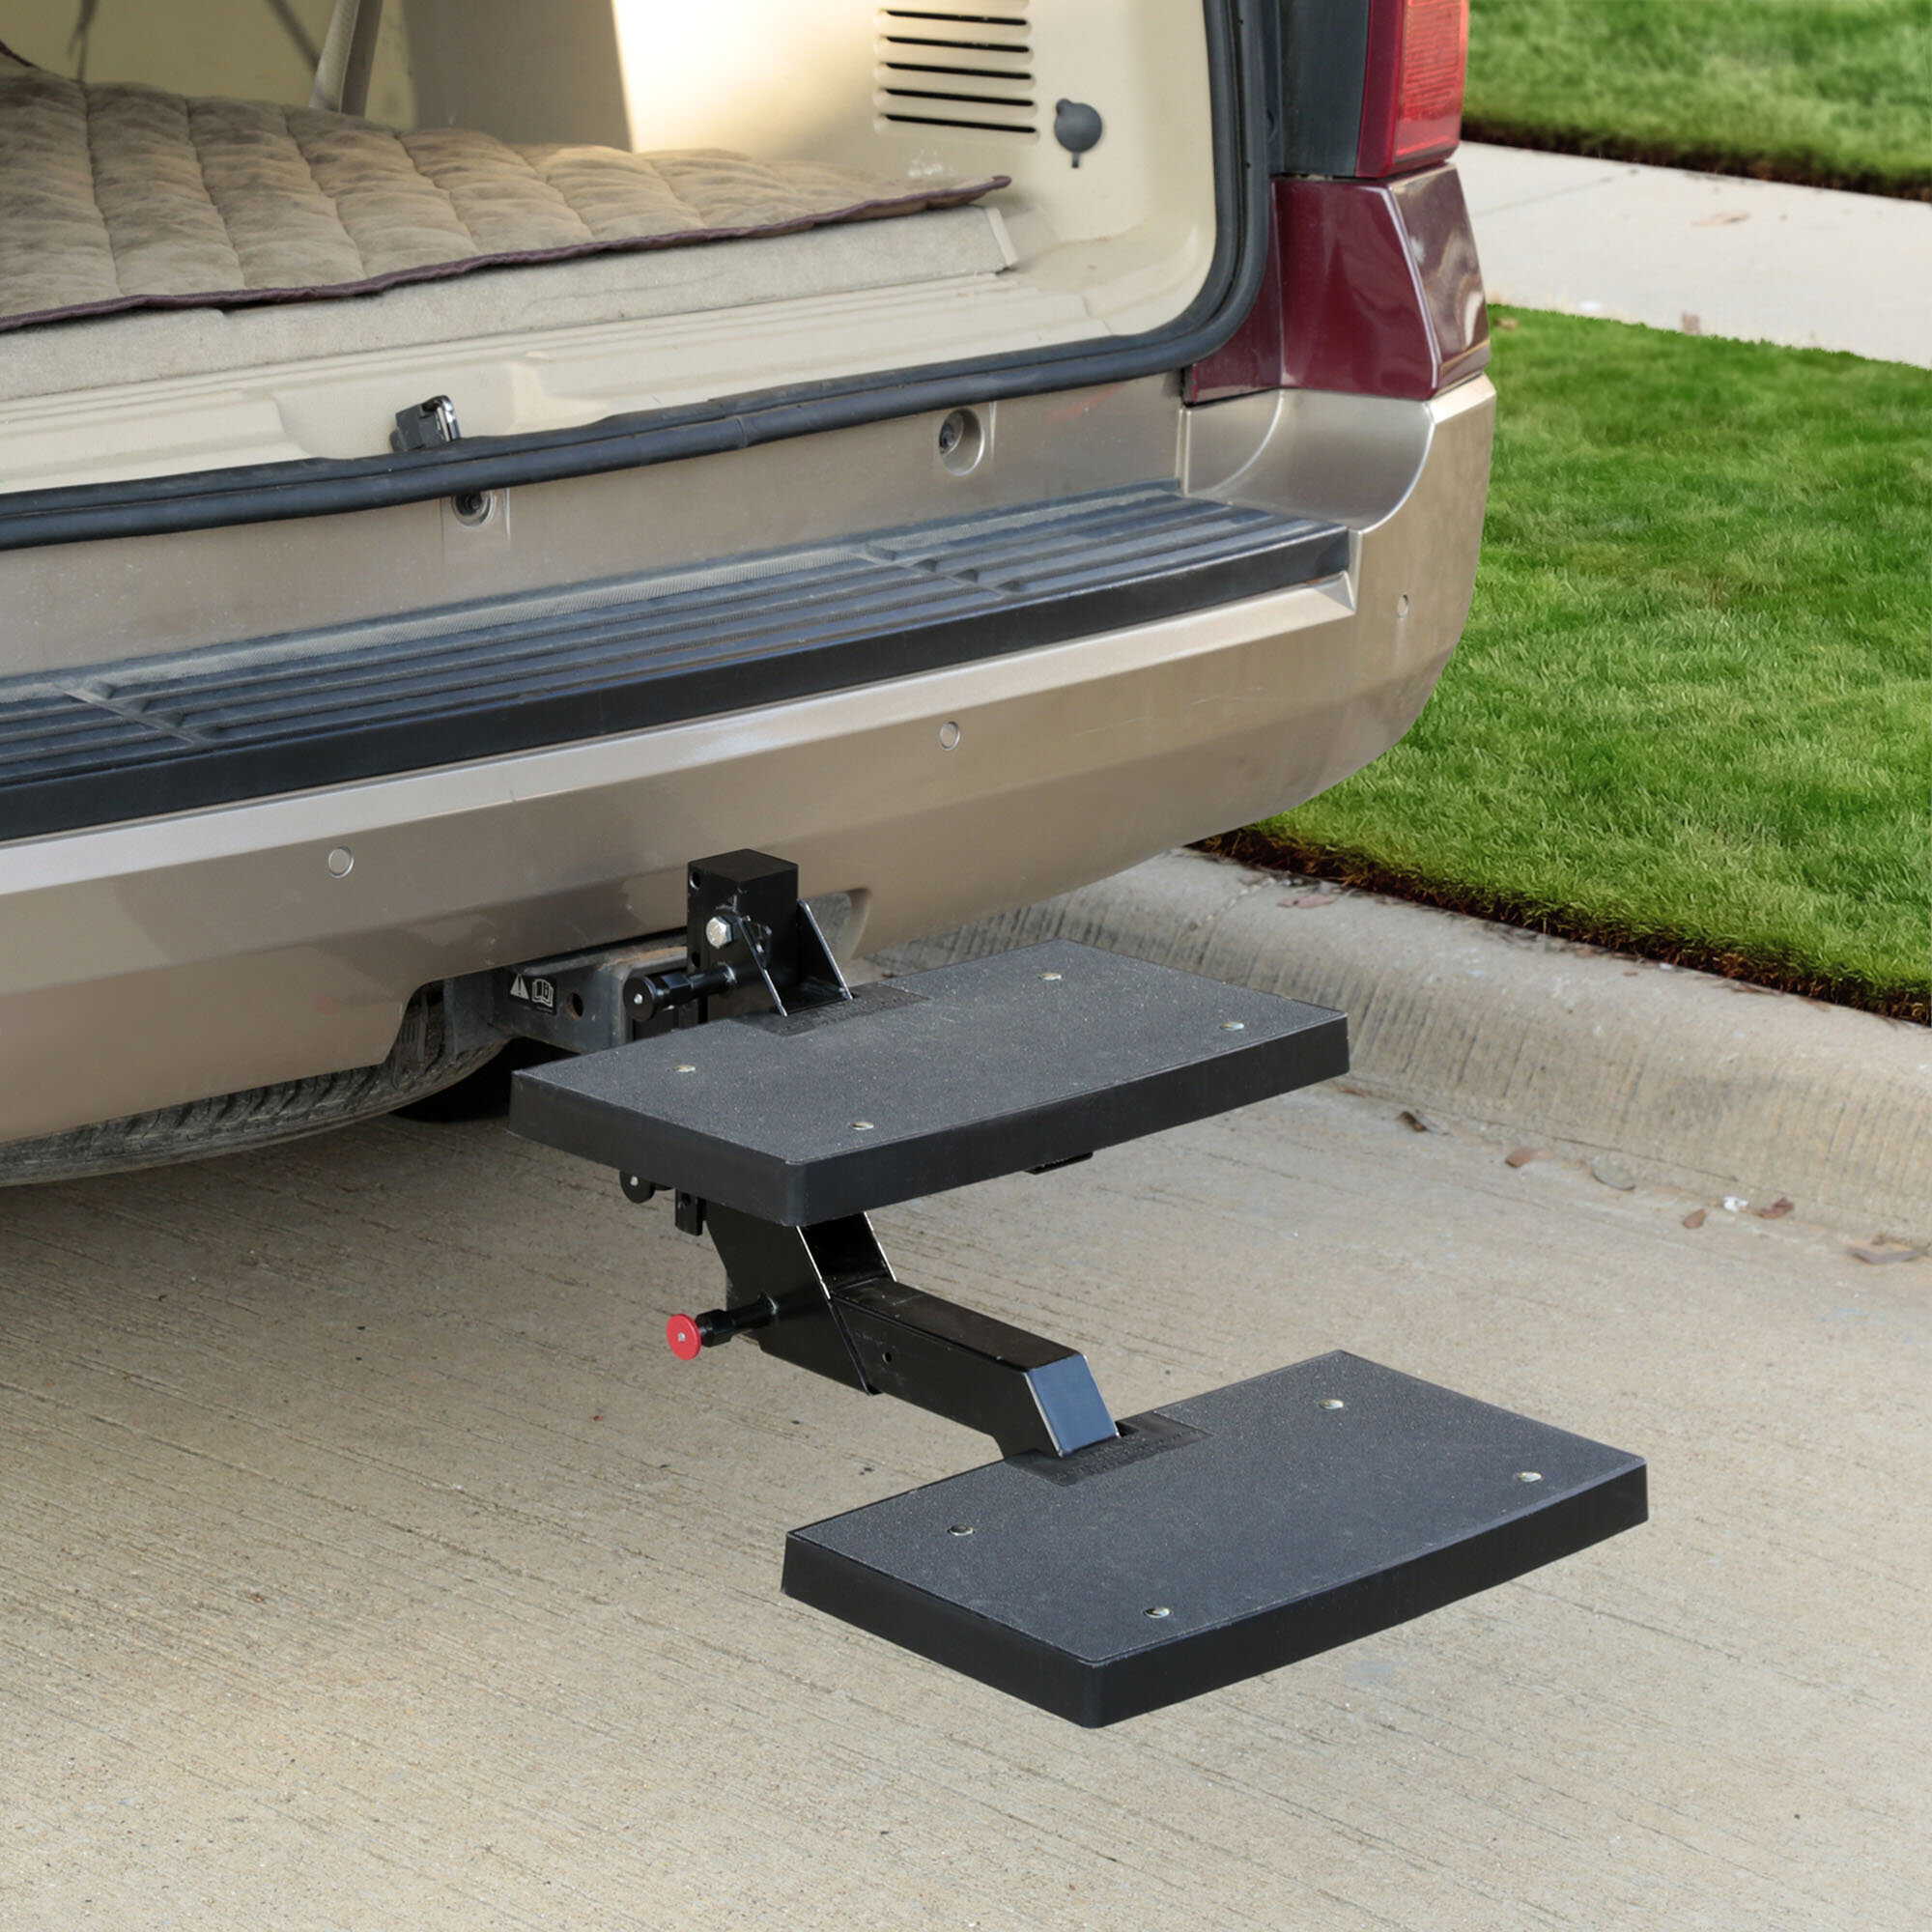 SolvitHappy Ride Dog Hitch Step & Reviews